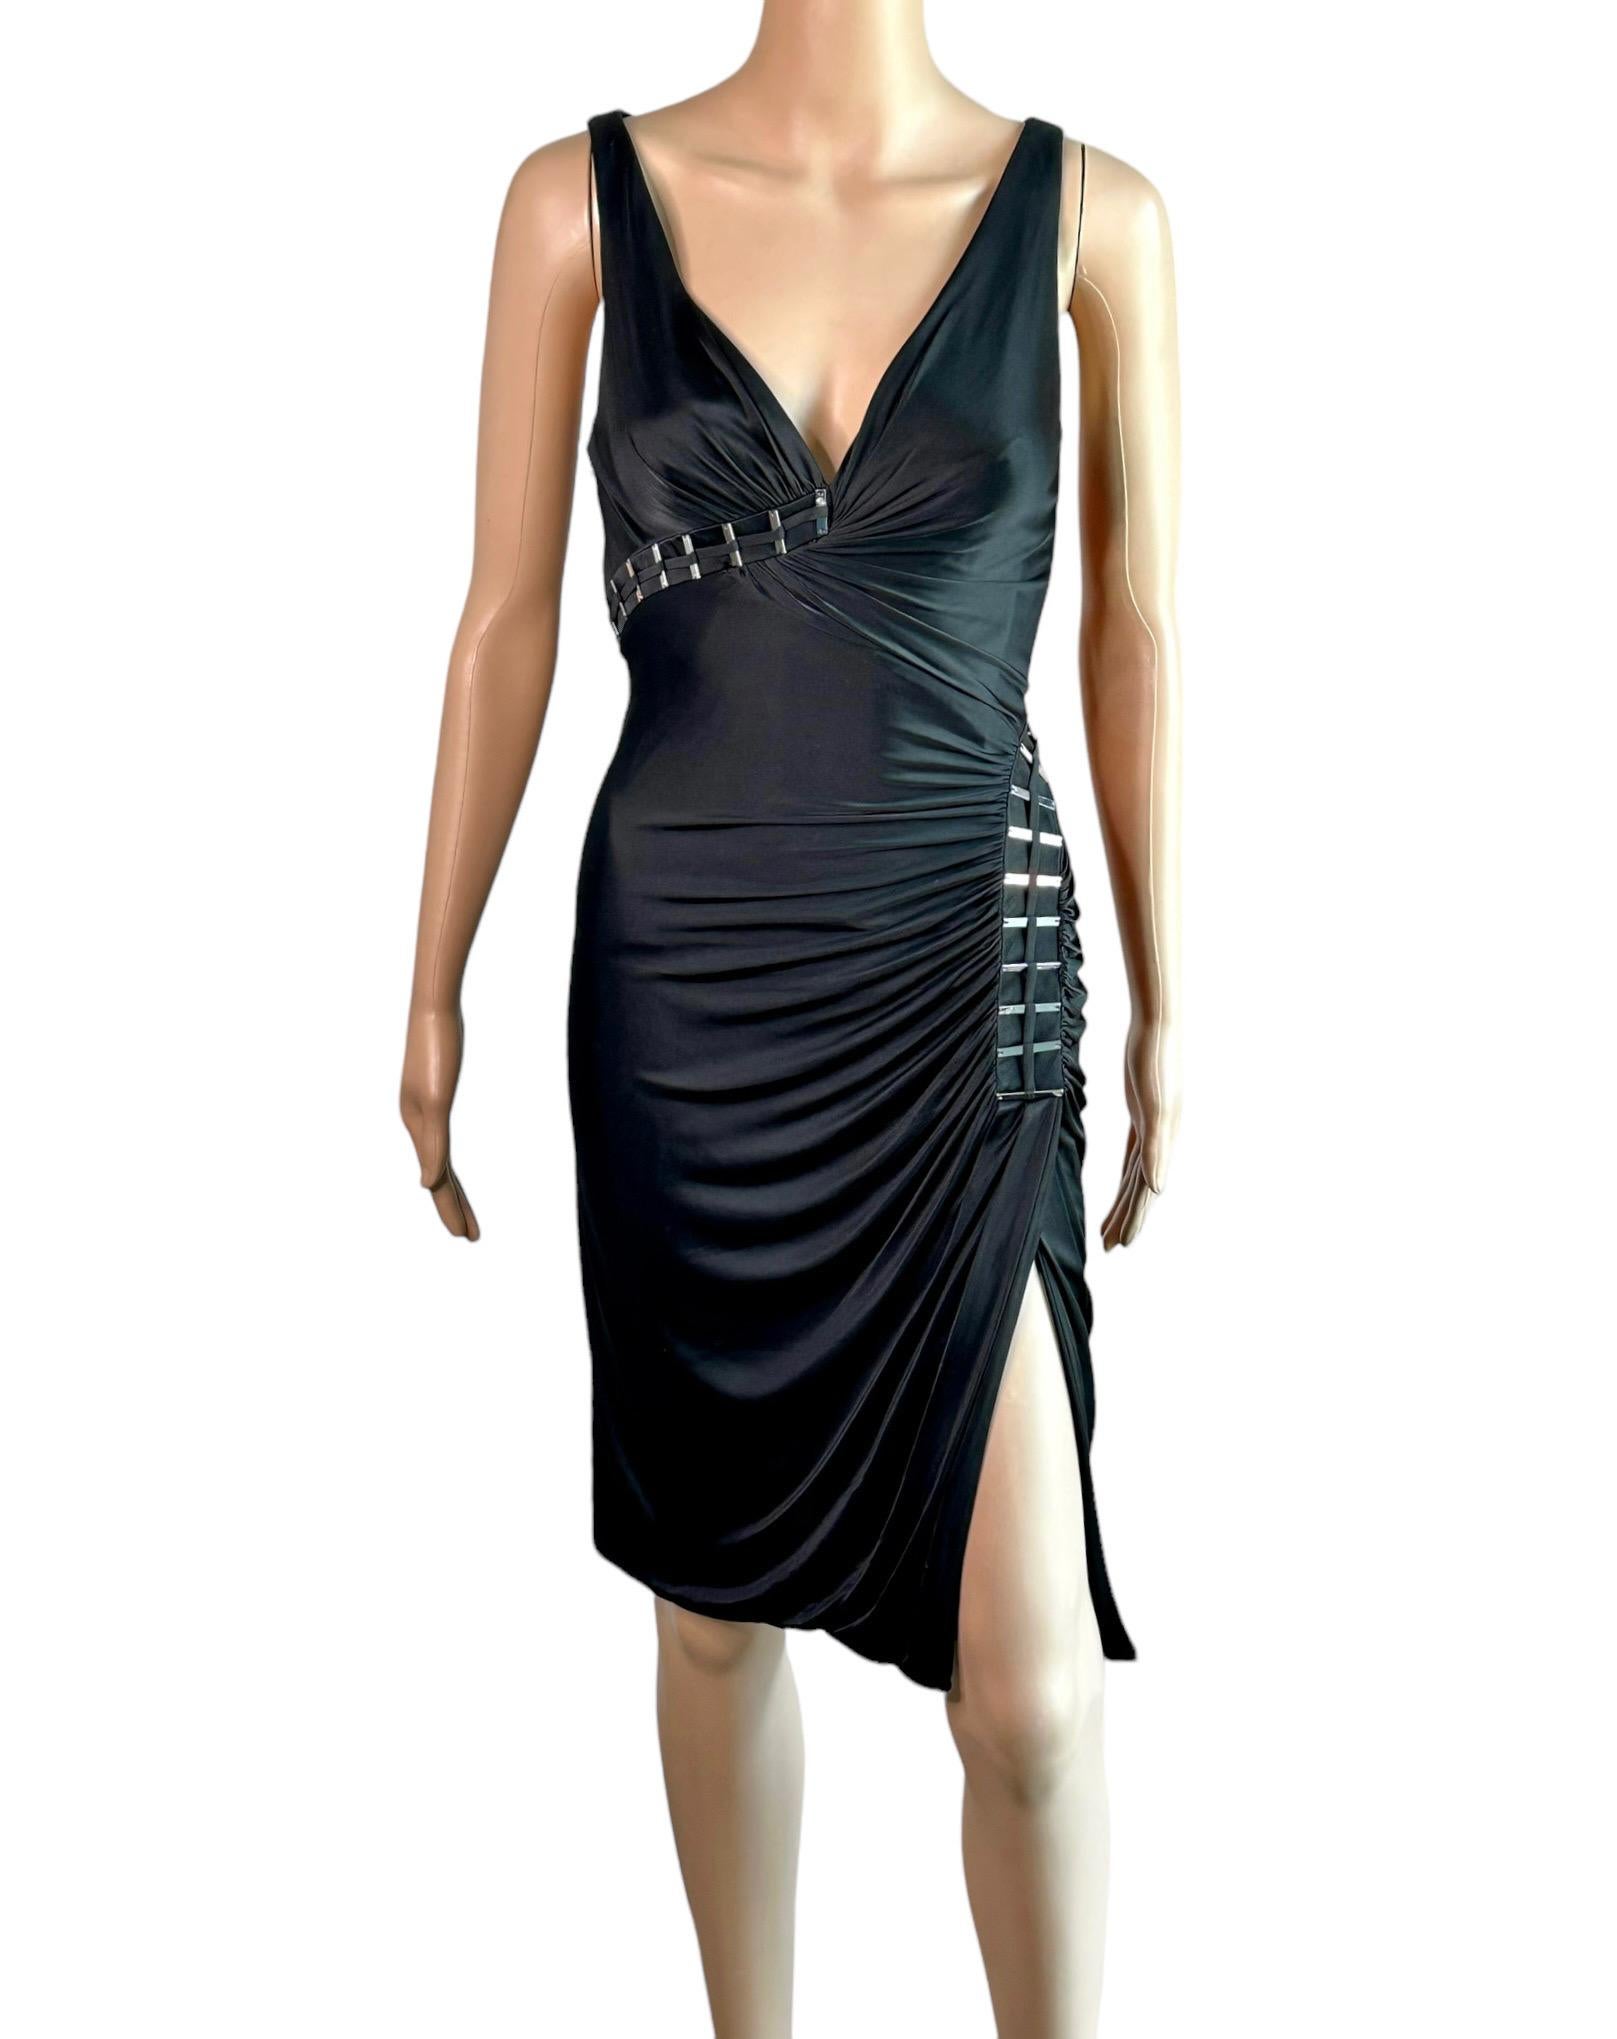 Versace F/W 2009 Embellished Plunging Neckline Open Back Black Dress In Good Condition For Sale In Naples, FL